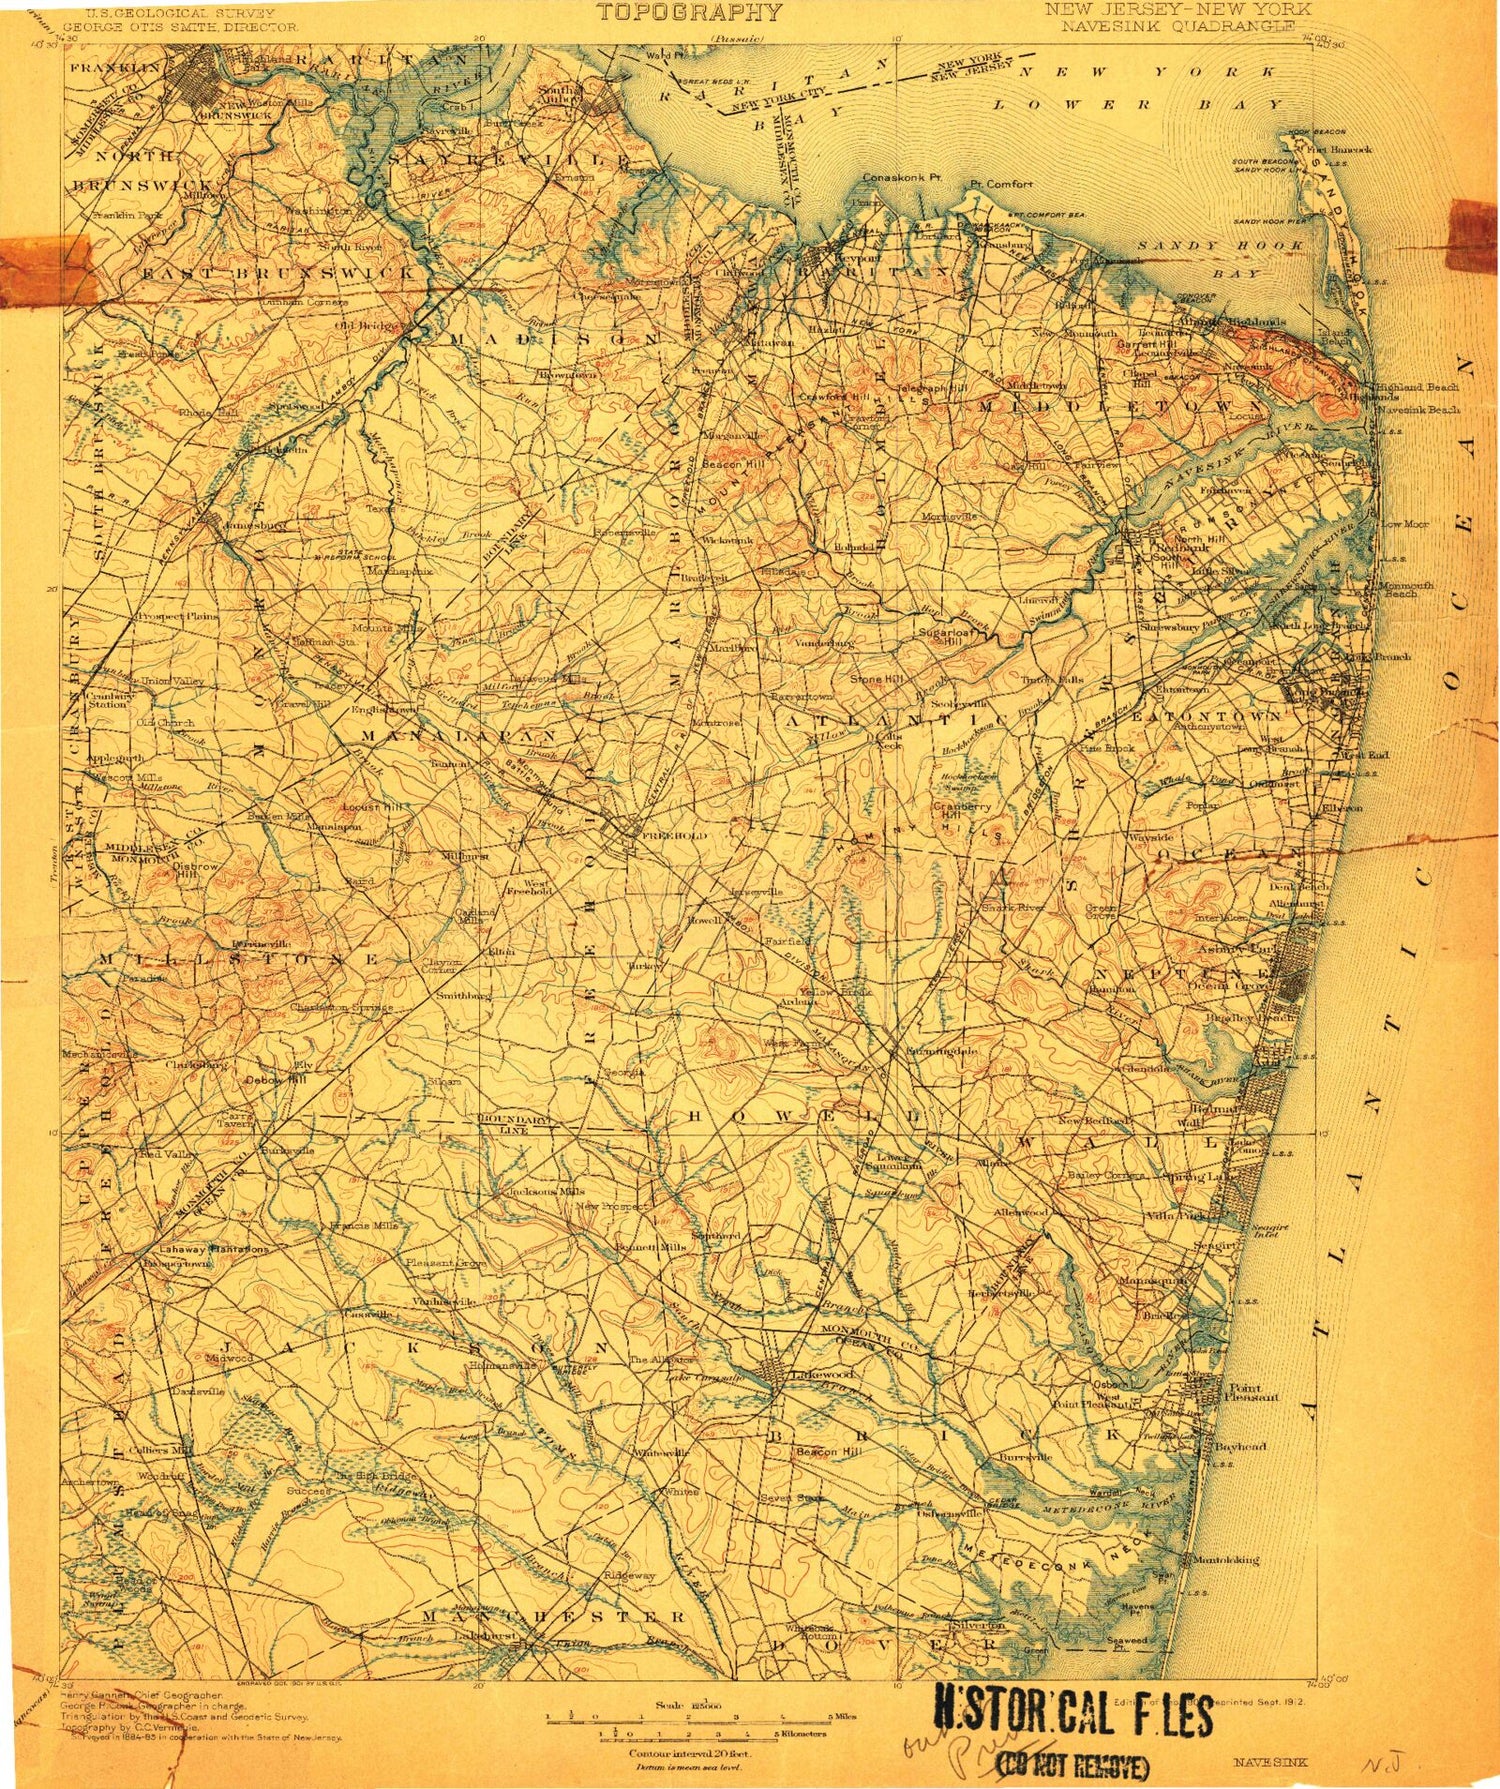 Historic 1902 Navesink New Jersey 30'x30' Topo Map Image